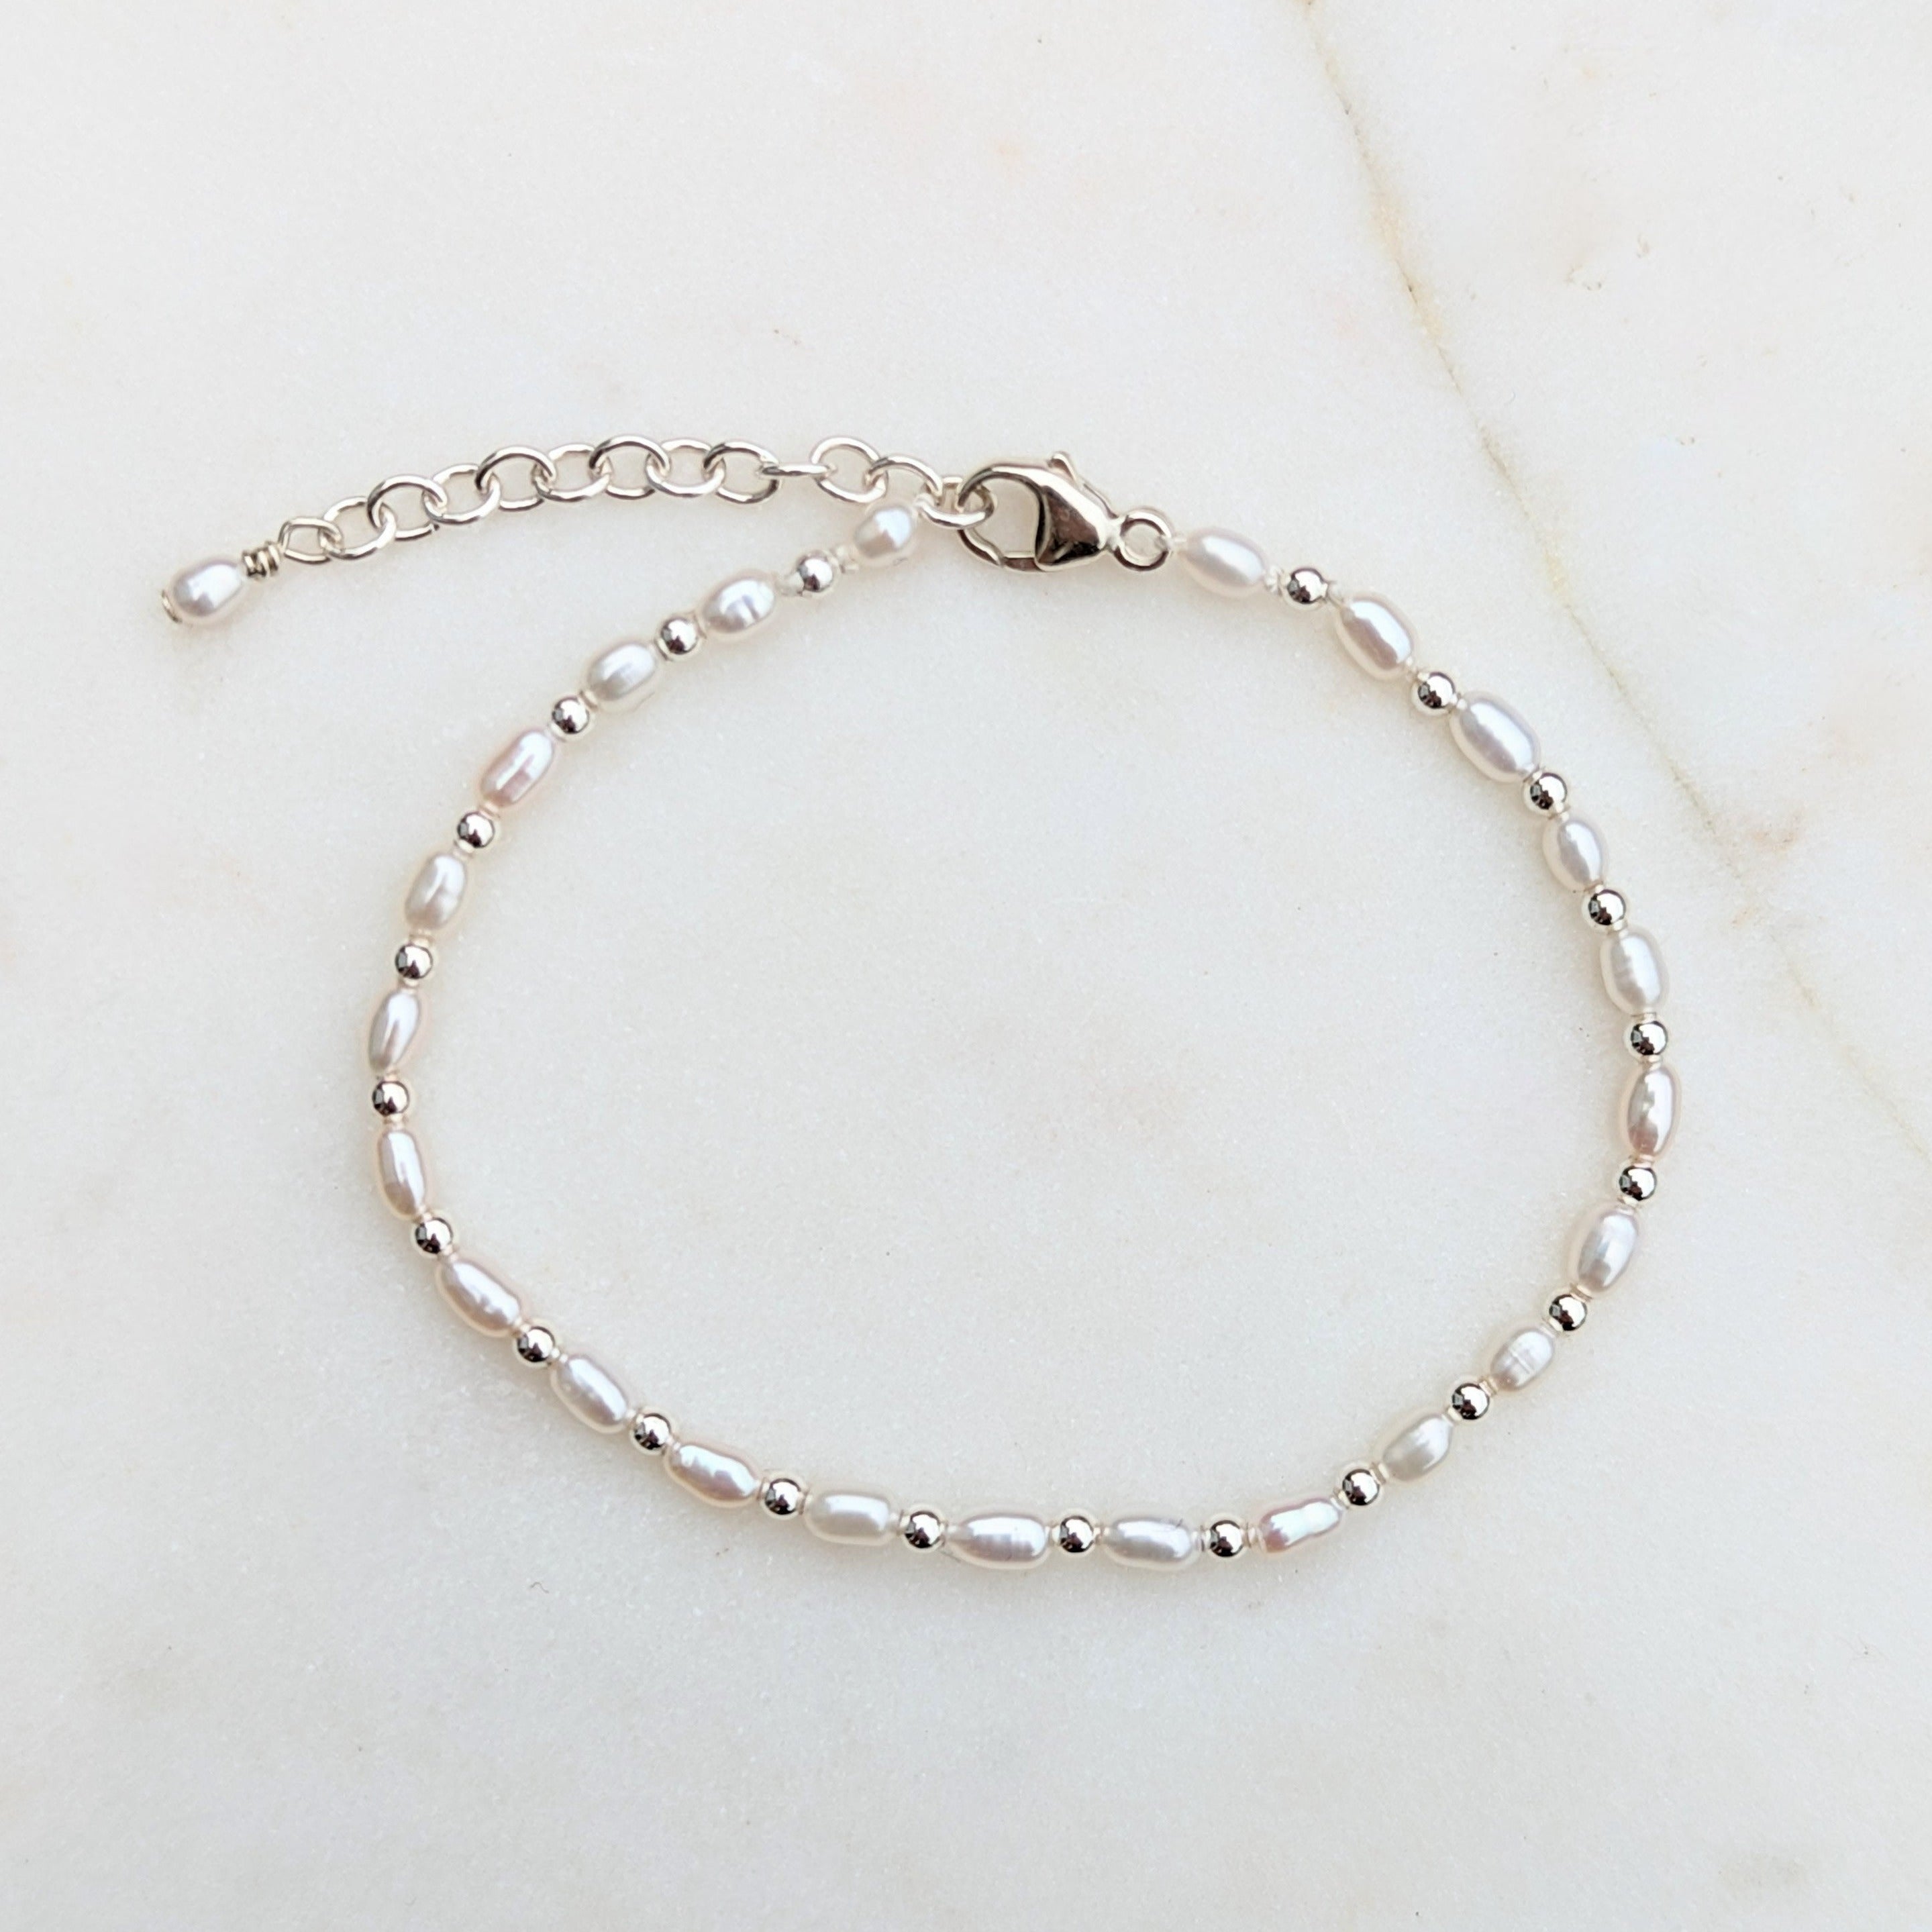 Tiny pearl and silver bead adjustable bracelet